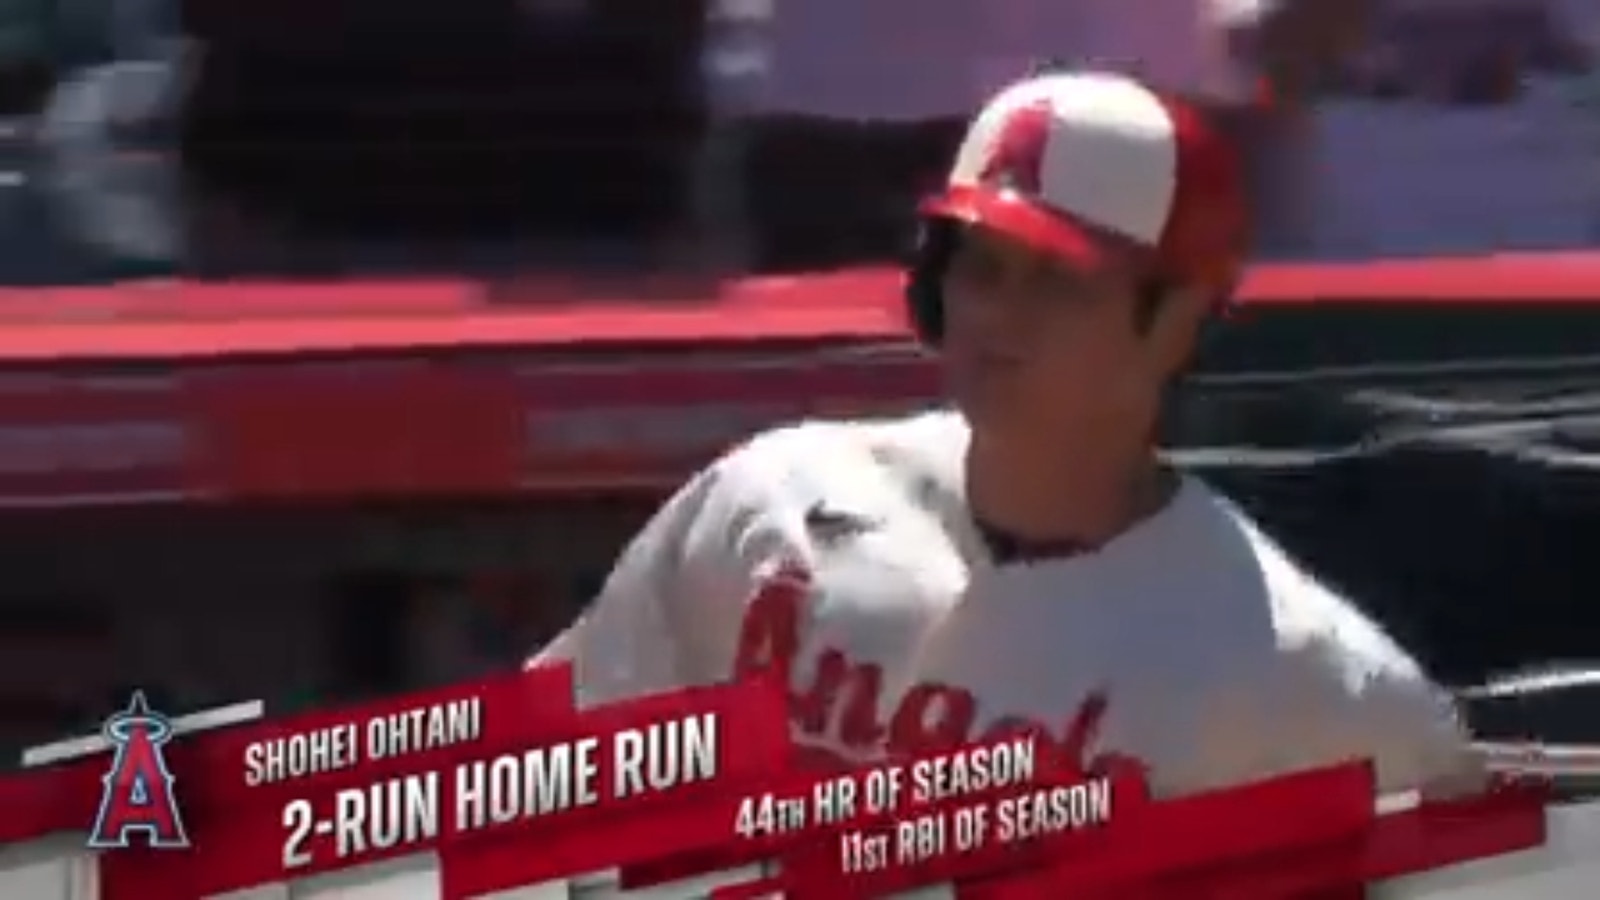 Shohei Ohtani launches MLB-leading 44th HR to give Angels lead vs. Reds